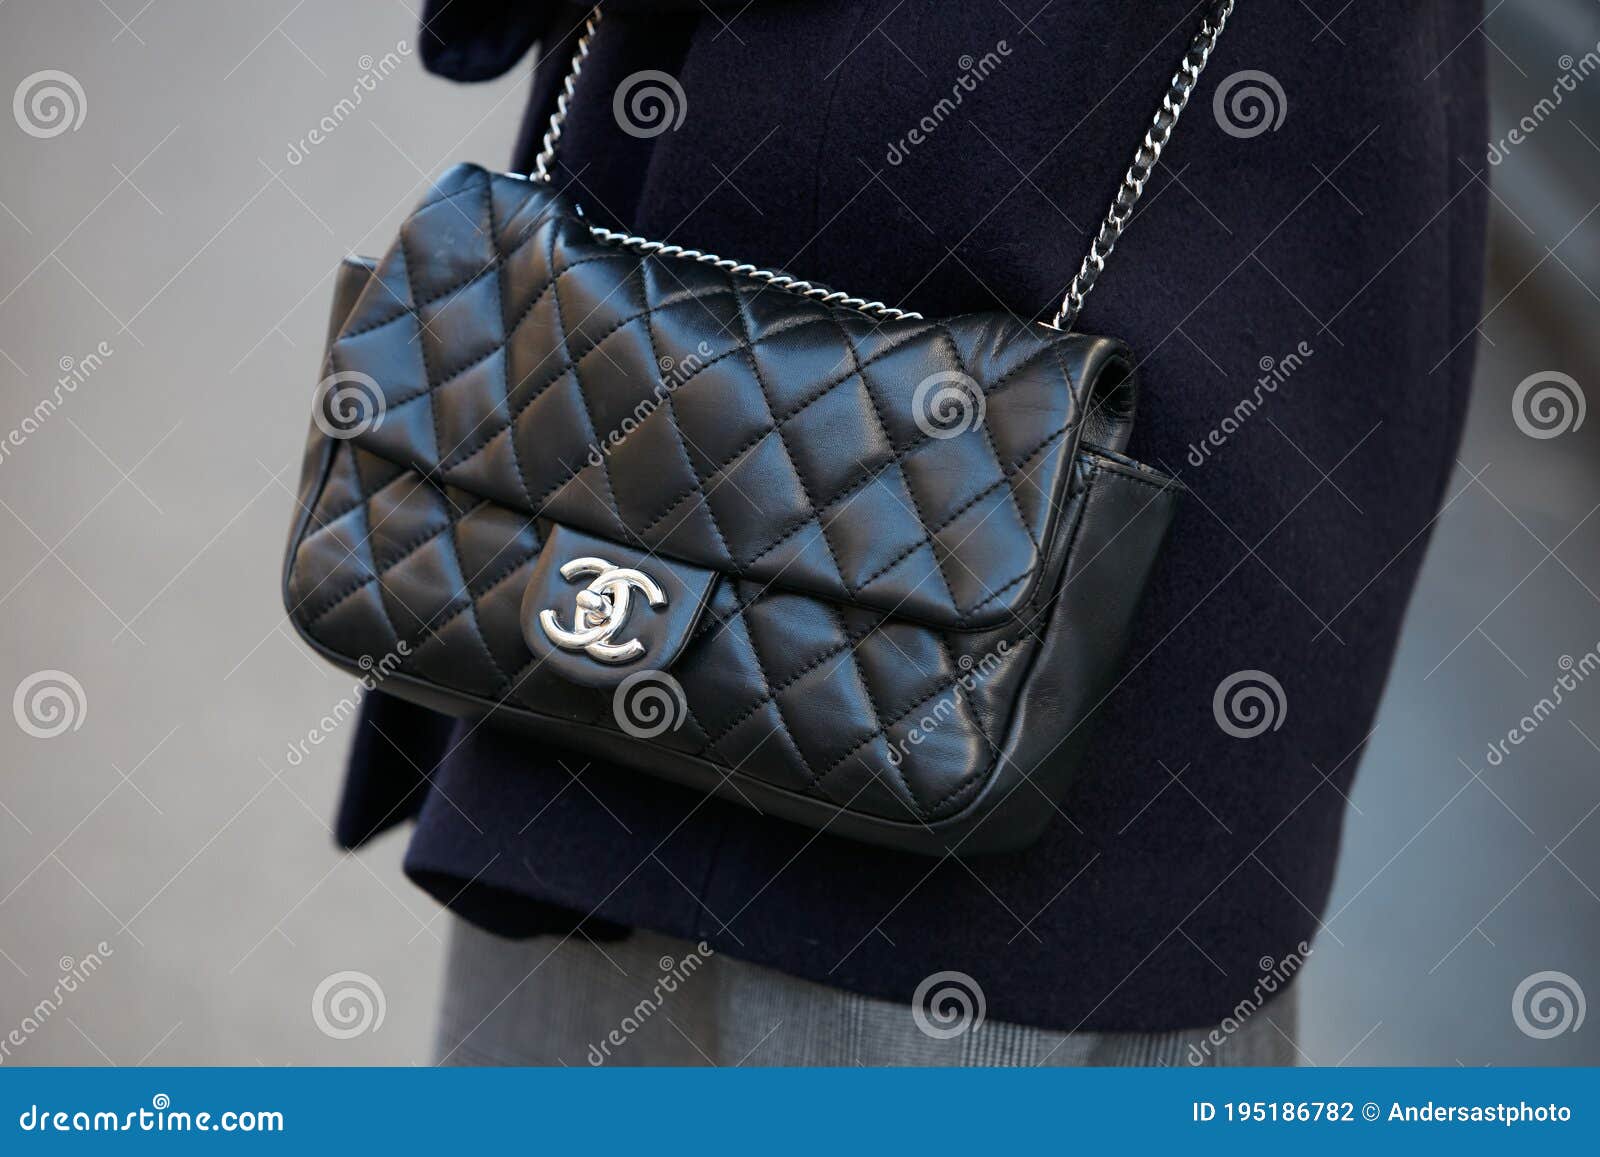 Woman with Black Leather Chanel Bag with Silver Chain before N 21 Fashion  Show, Milan Fashion Week Street Editorial Photography - Image of black,  show: 195186782